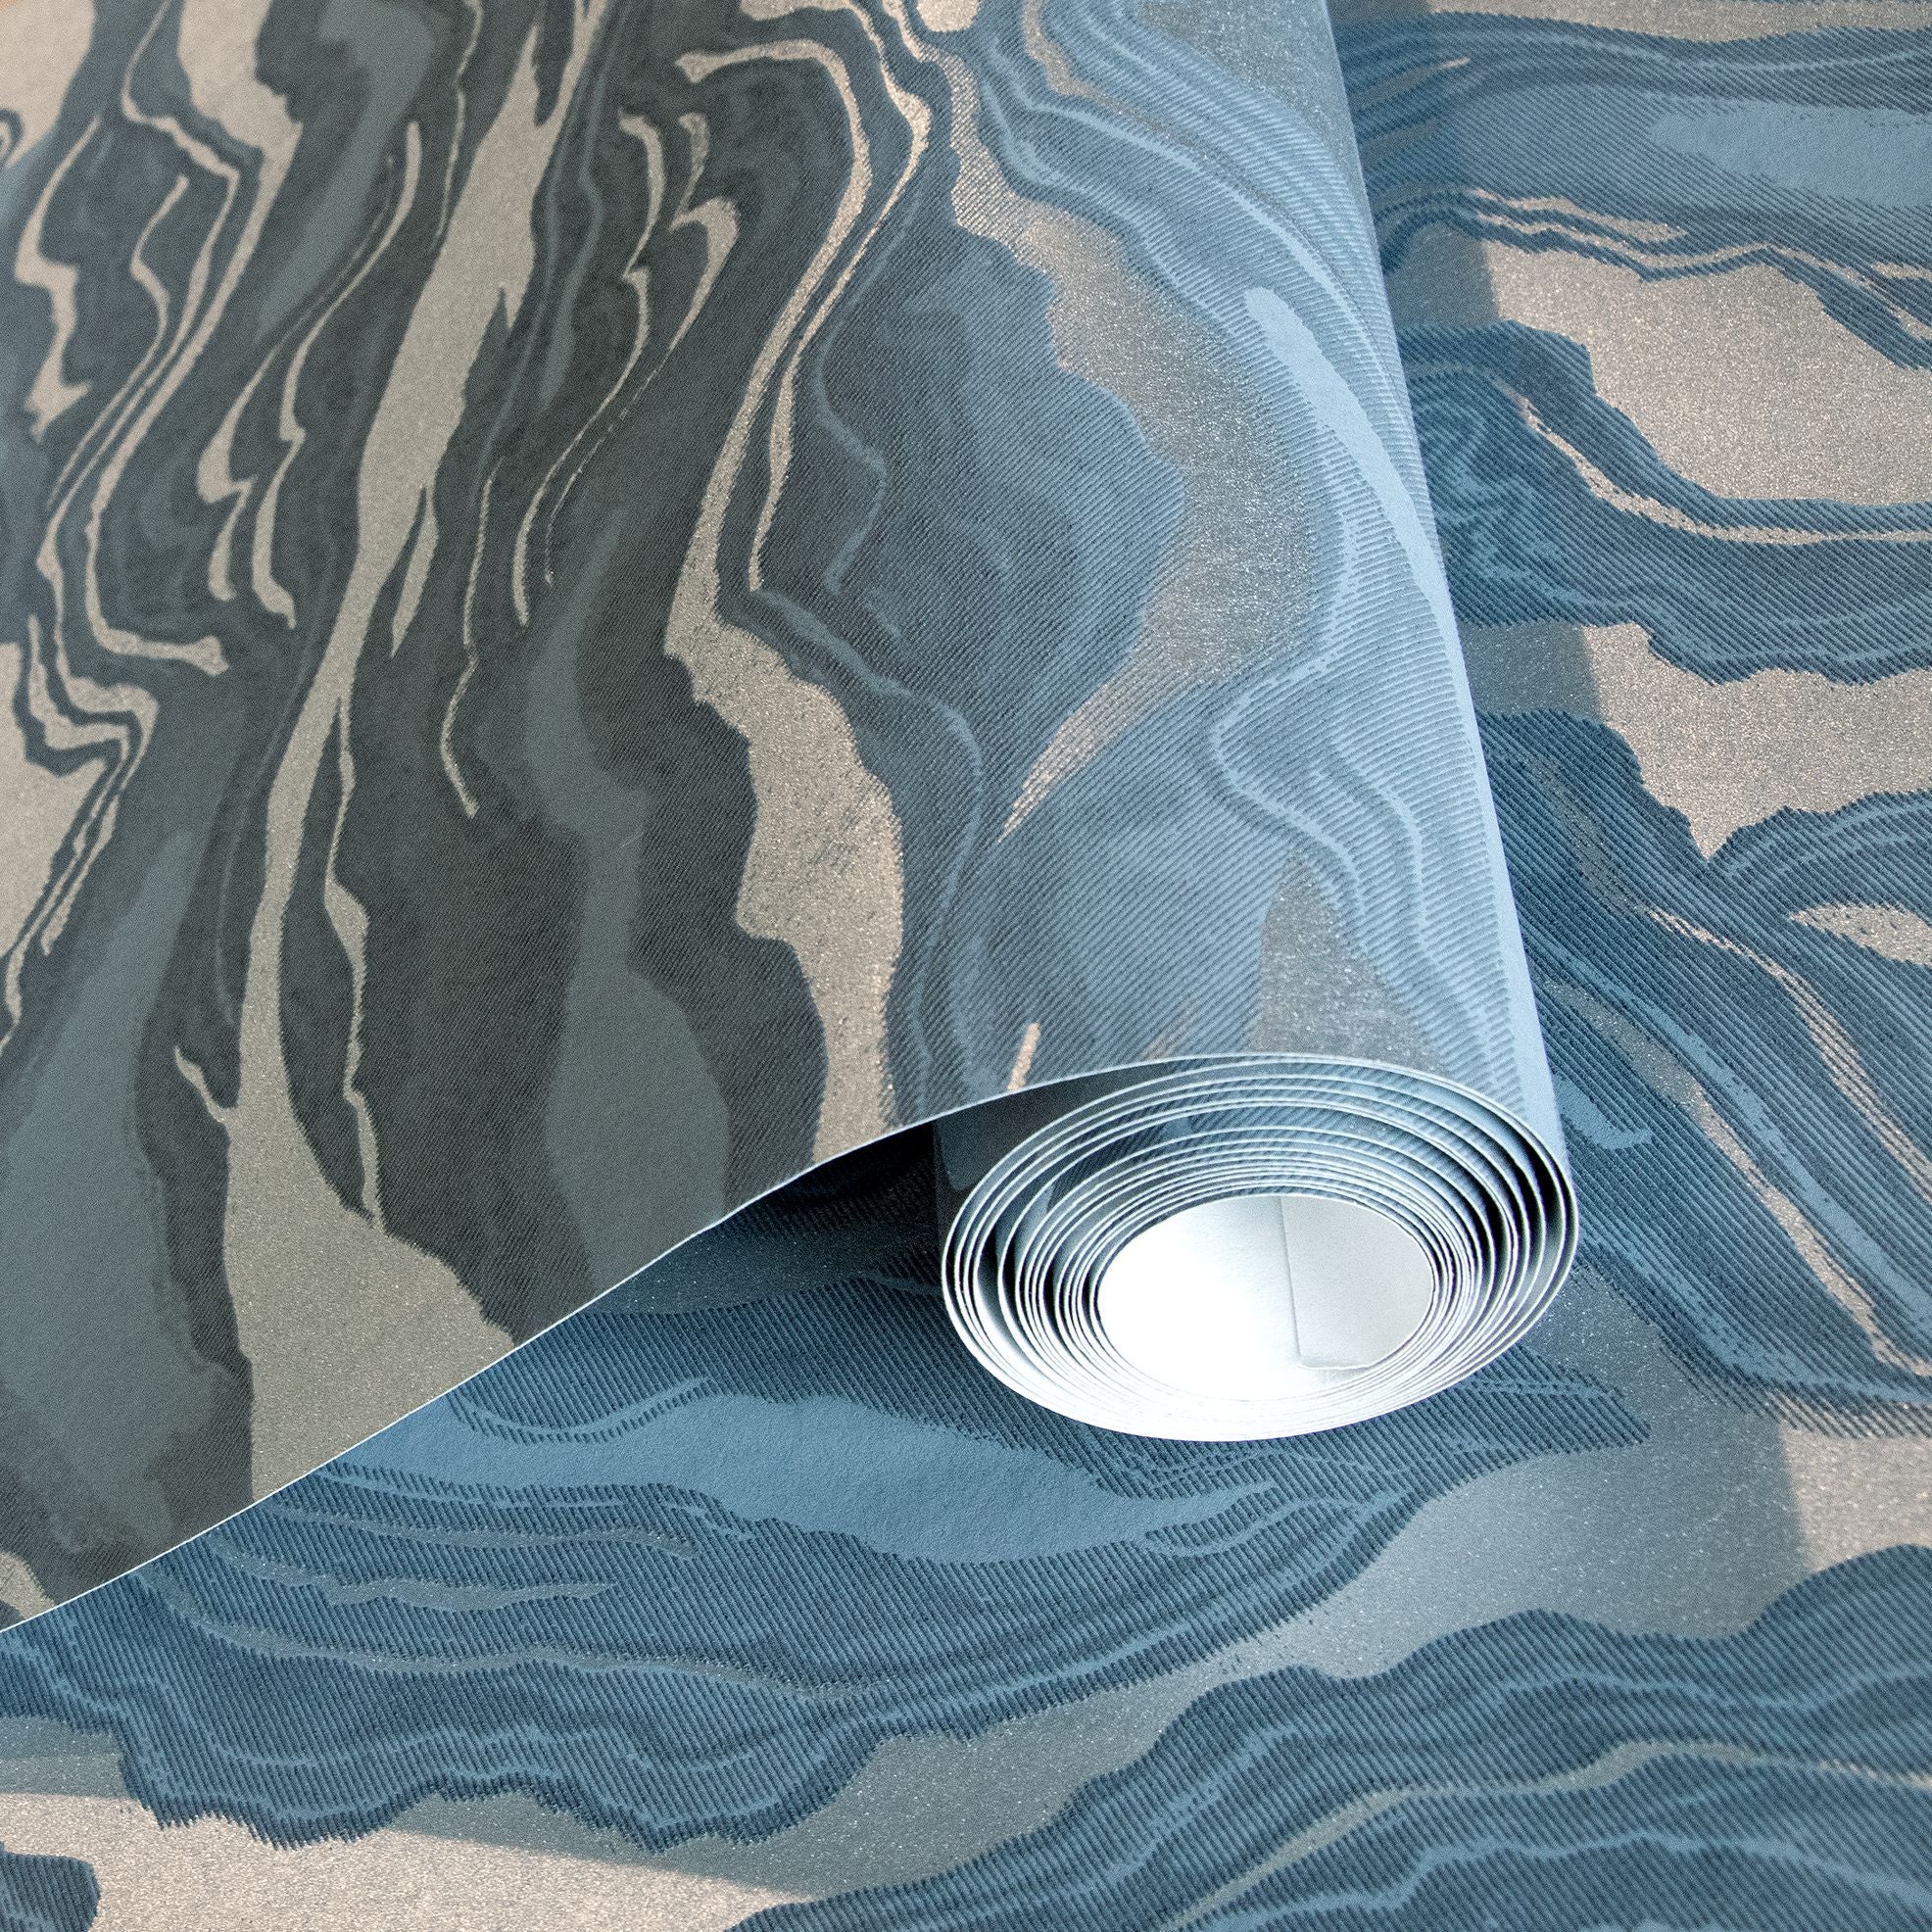 Slow Living - Reflections industrial wallpaper Hohenberger    